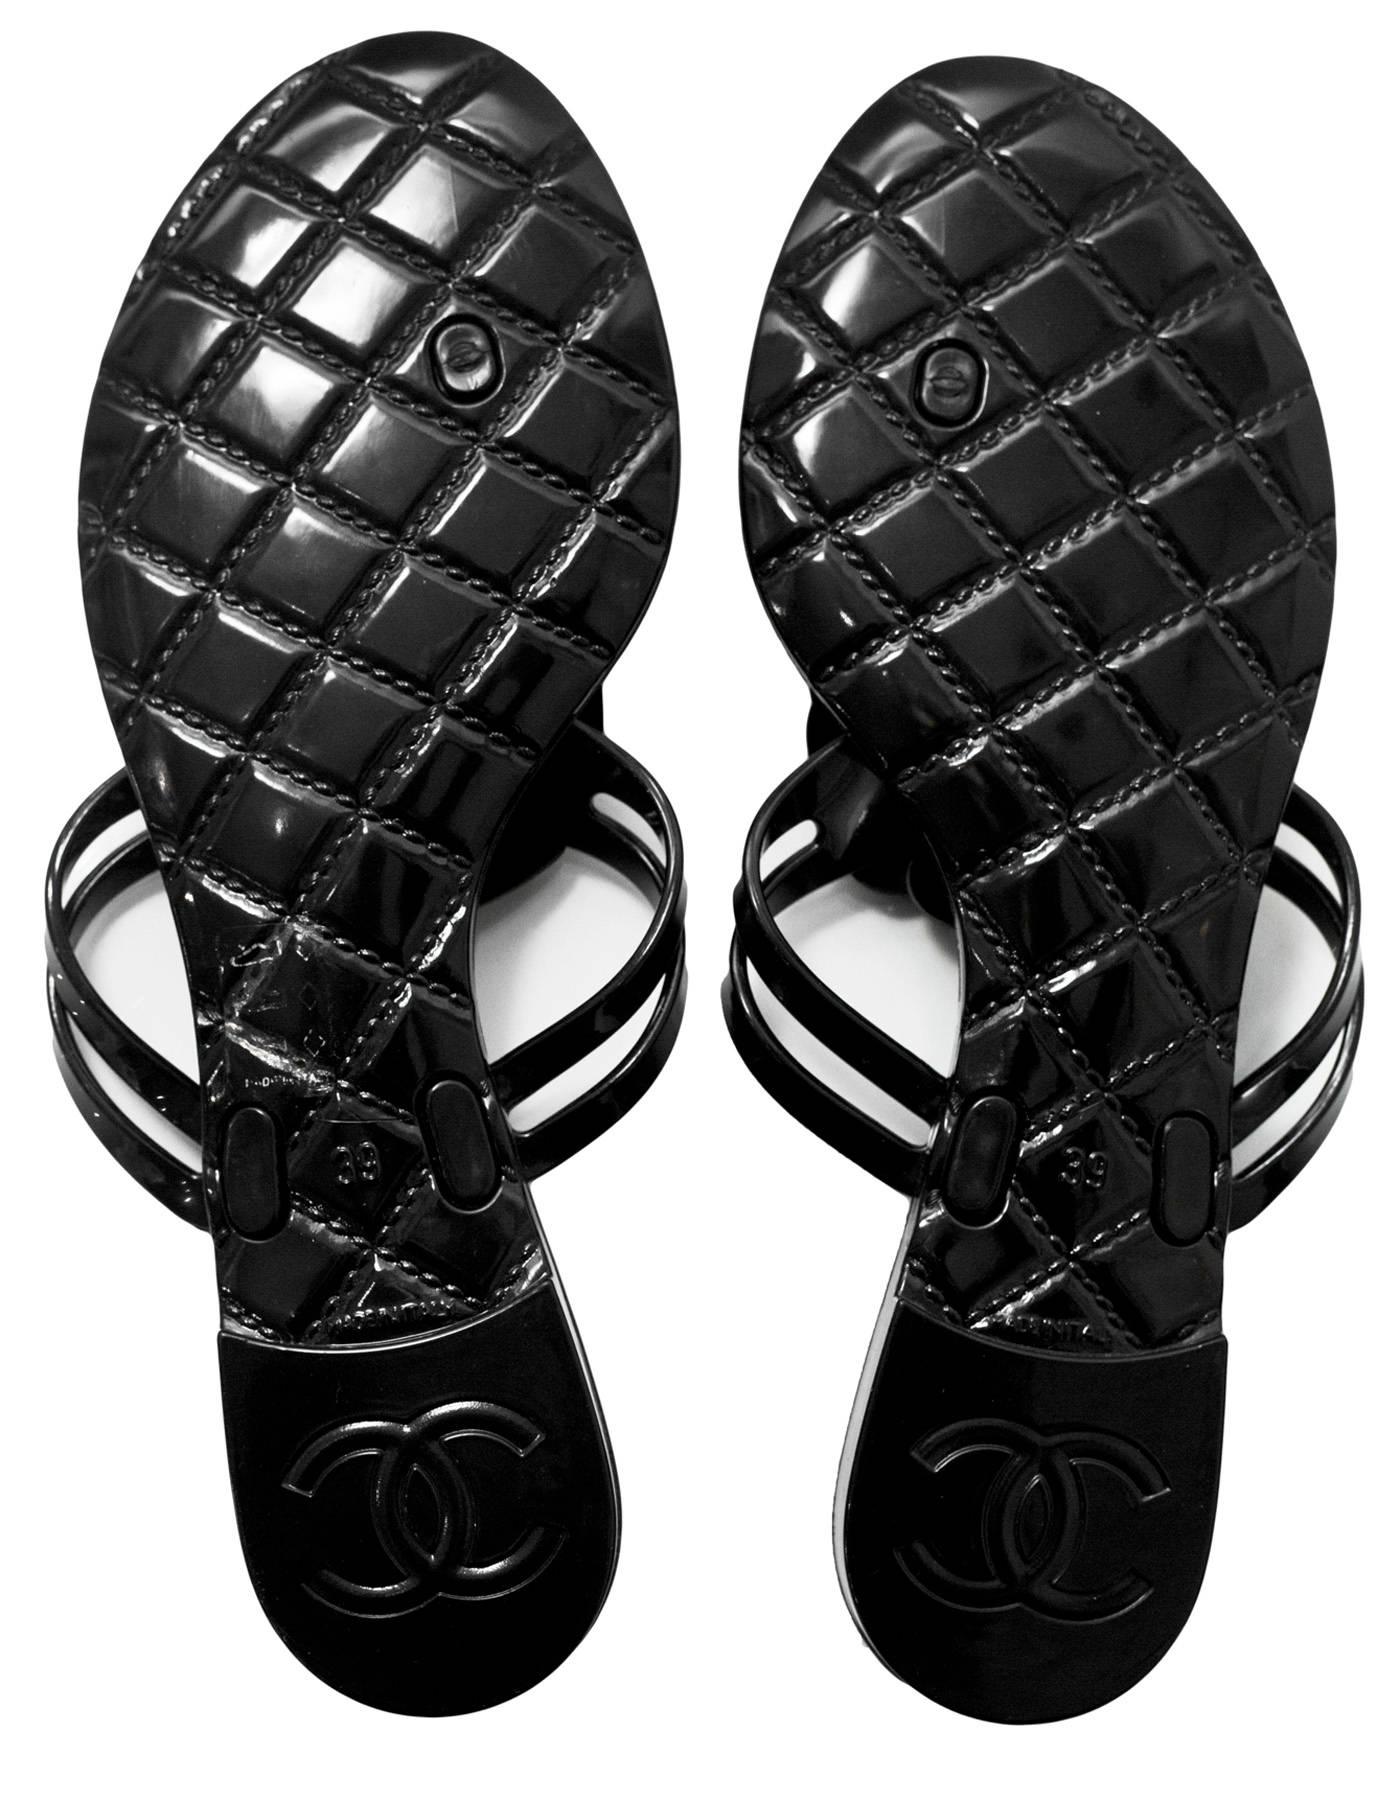 Chanel Black Jelly Camellia Sandals Sz 39 with Box 1